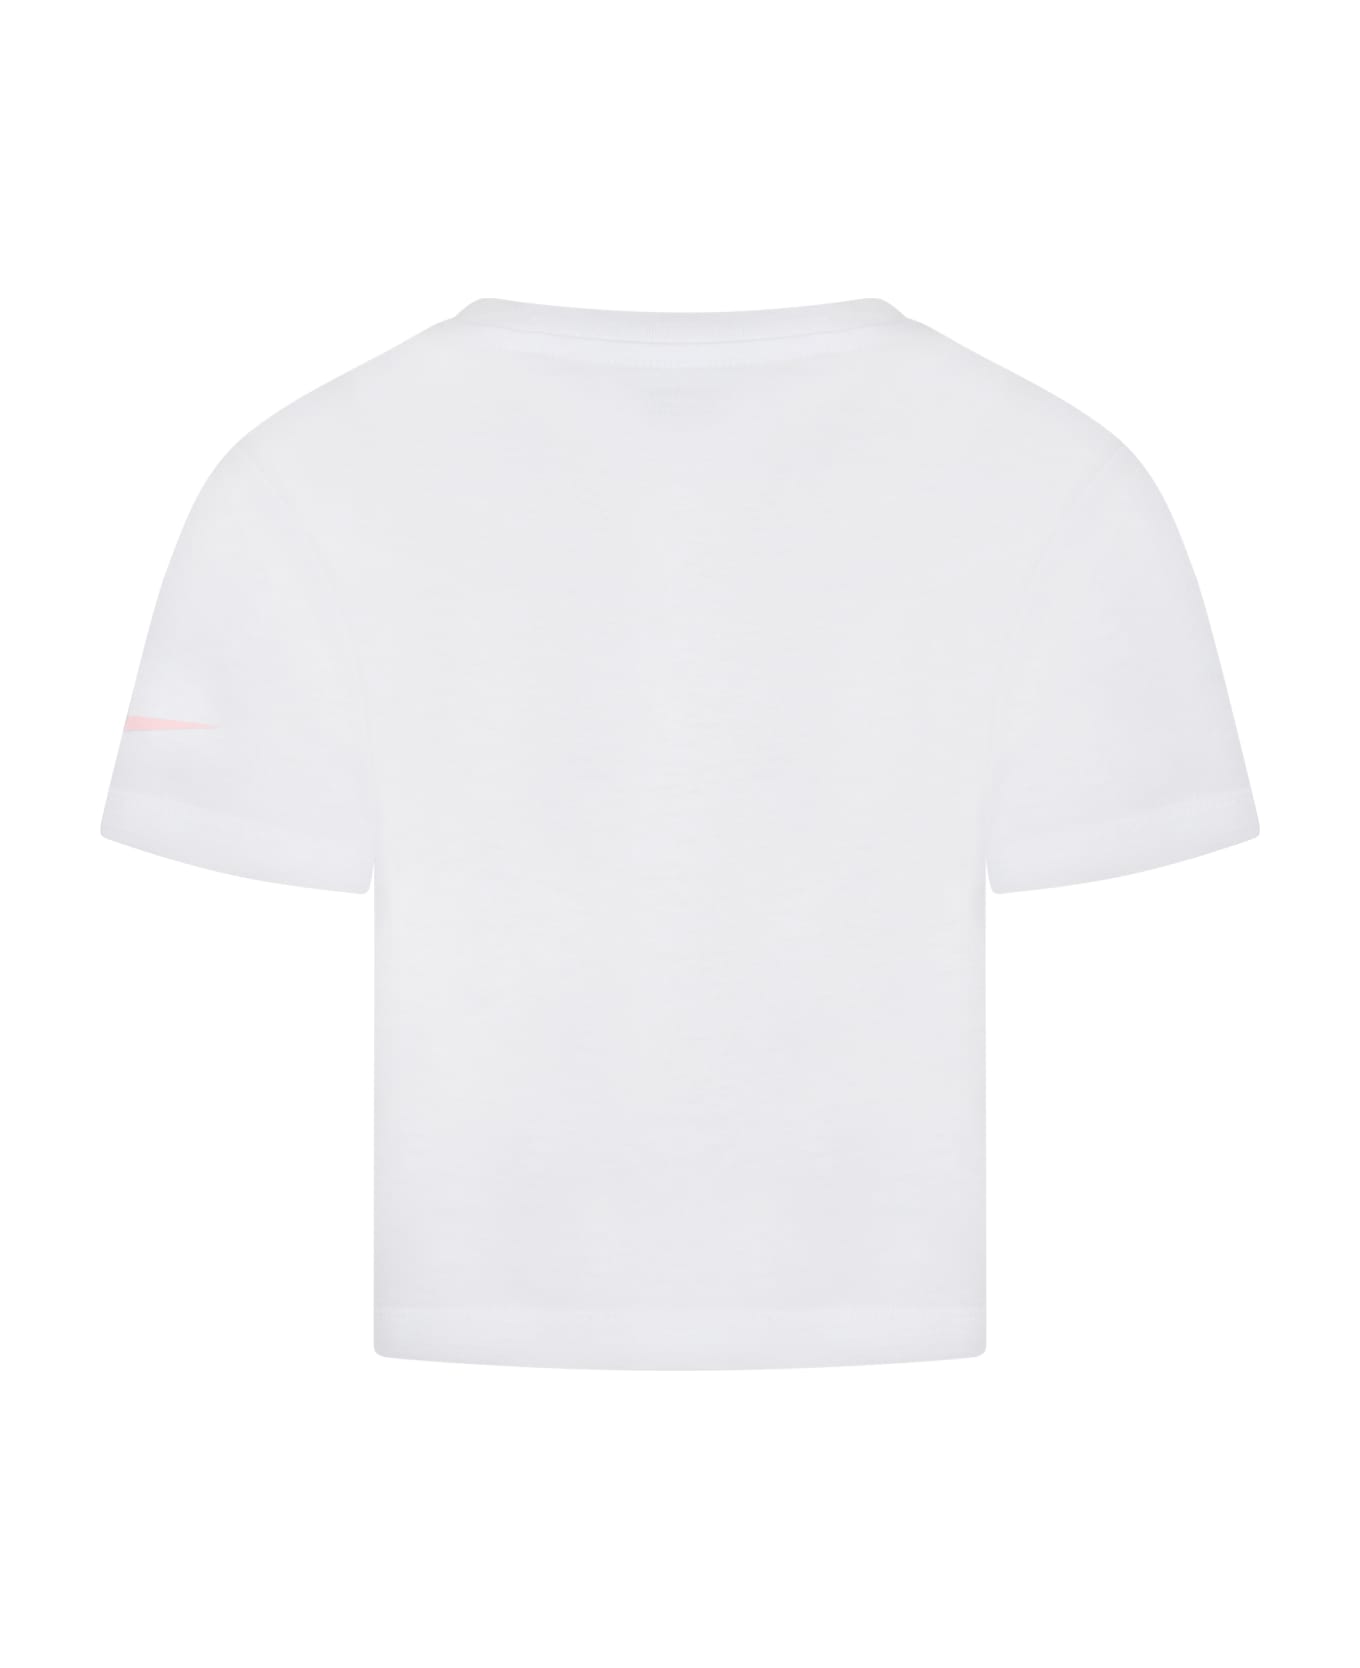 Nike White T-shirt For Girl With Iconic Swoosh - White Tシャツ＆ポロシャツ